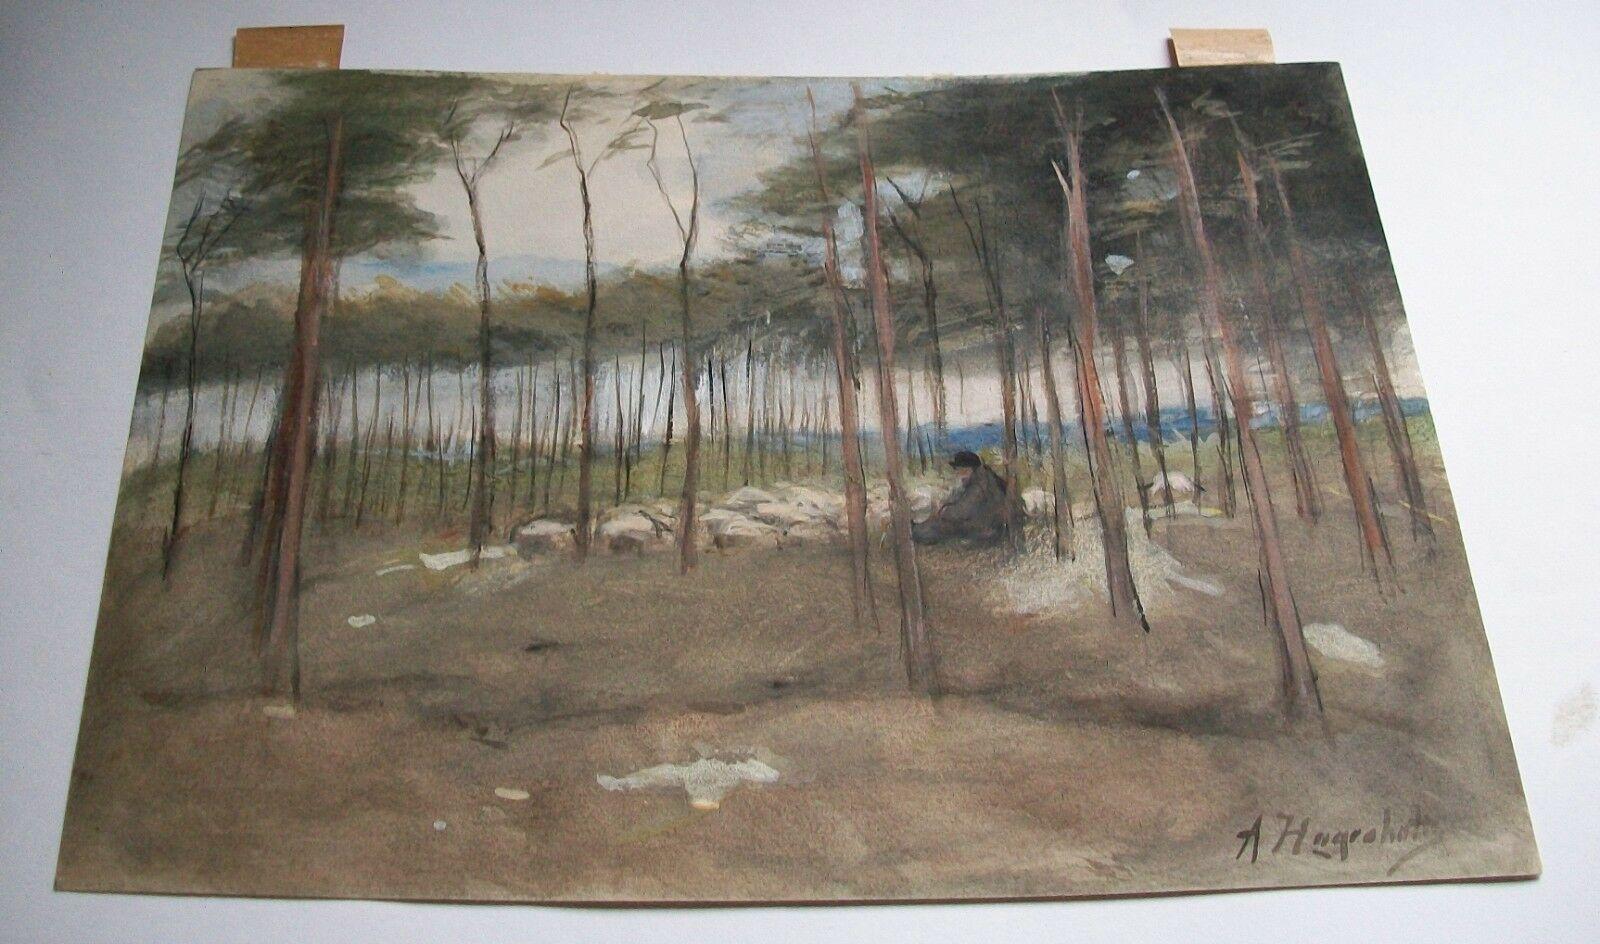 Romantic Arina Hugenholtz, Landscape Painting with Sheep, Netherlands, 19th Century For Sale